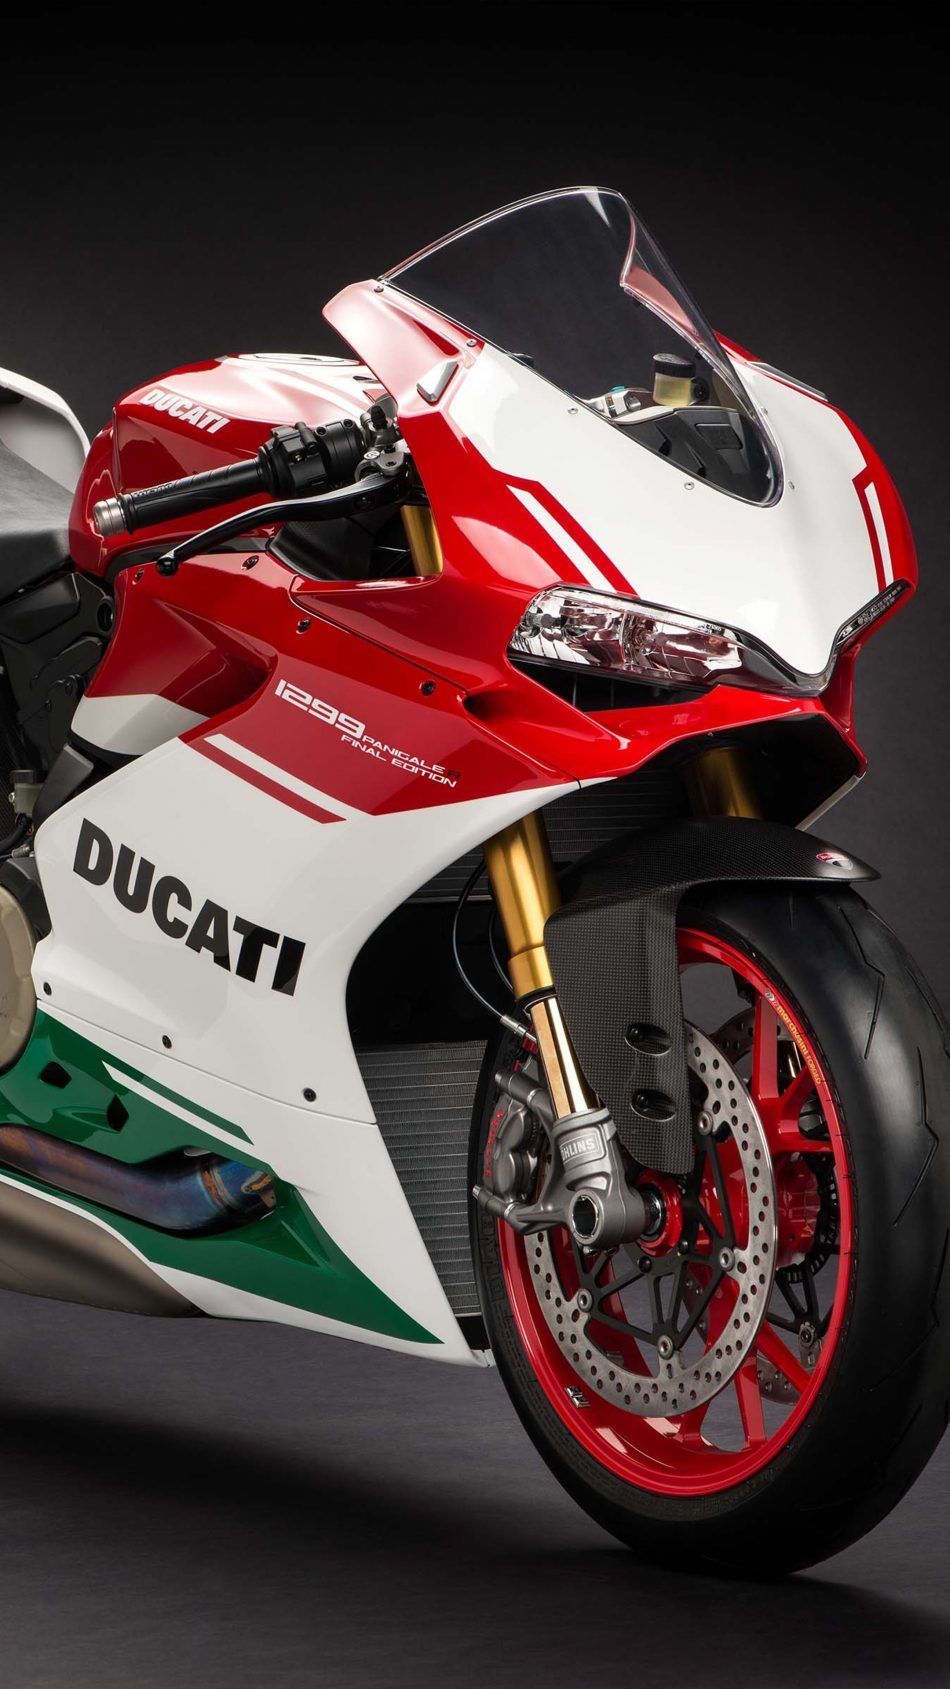 Ducati 1299 Panigale R Final Edition 4k Ultra HD Mobile 1299 Final Edition